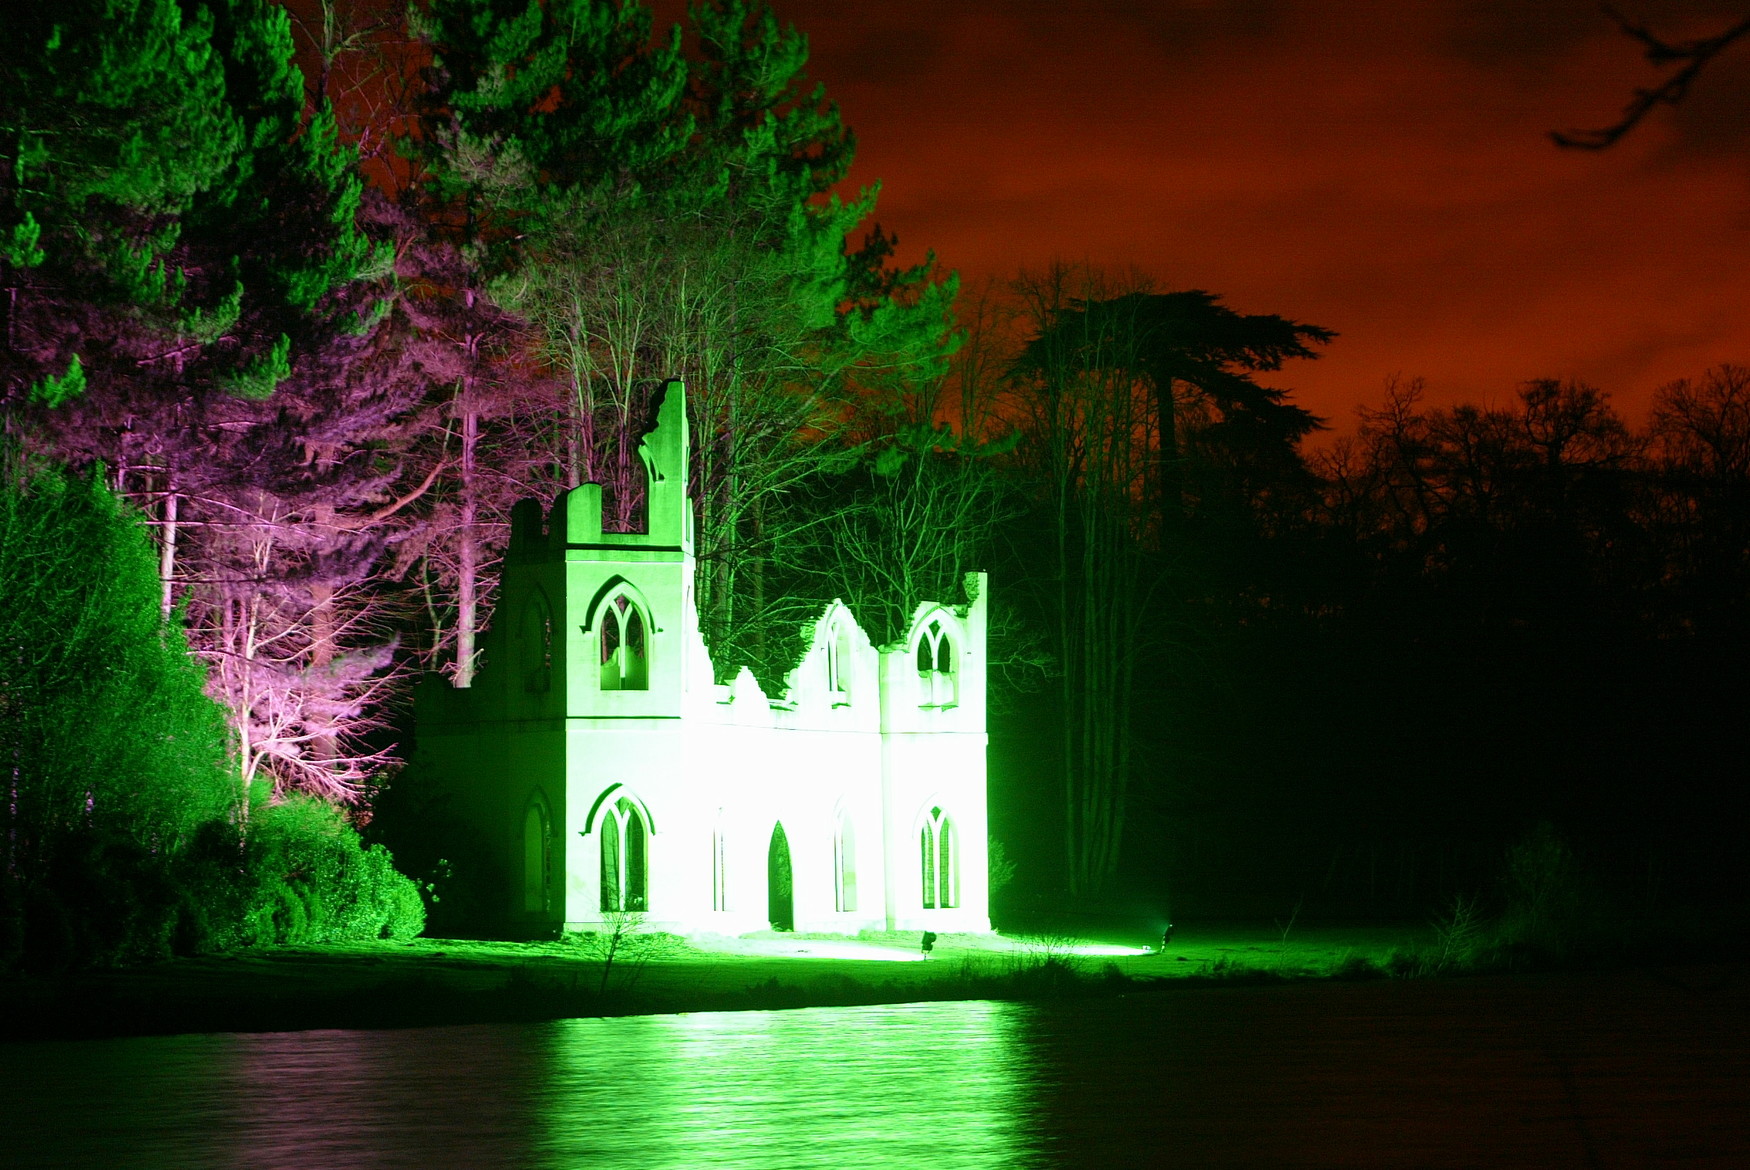 painshill park, cobham, christmas, whats on, entertainment, illuminations, whats on, surrey